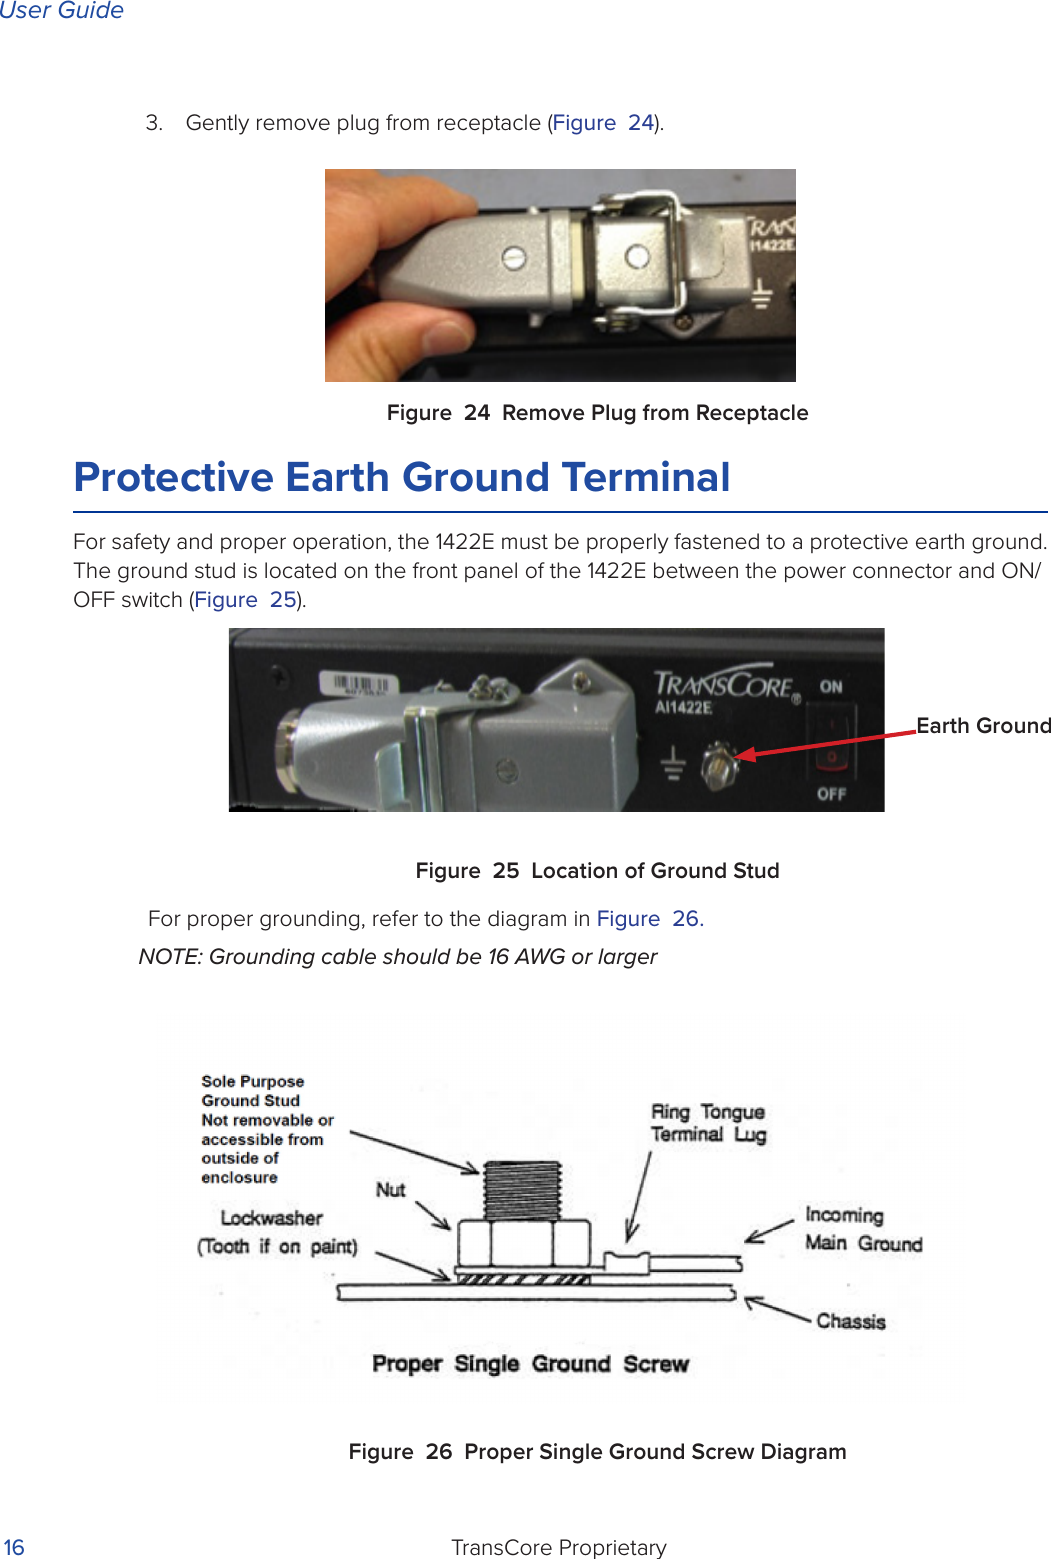 User GuideTransCore Proprietary 163.  Gently remove plug from receptacle (Figure 24).Figure 24 Remove Plug from ReceptacleProtective Earth Ground TerminalFor safety and proper operation, the 1422E must be properly fastened to a protective earth ground. The ground stud is located on the front panel of the 1422E between the power connector and ON/OFF switch (Figure 25).Figure 25 Location of Ground StudFor proper grounding, refer to the diagram in Figure 26. NOTE: Grounding cable should be 16 AWG or largerFigure 26 Proper Single Ground Screw DiagramEarth Ground